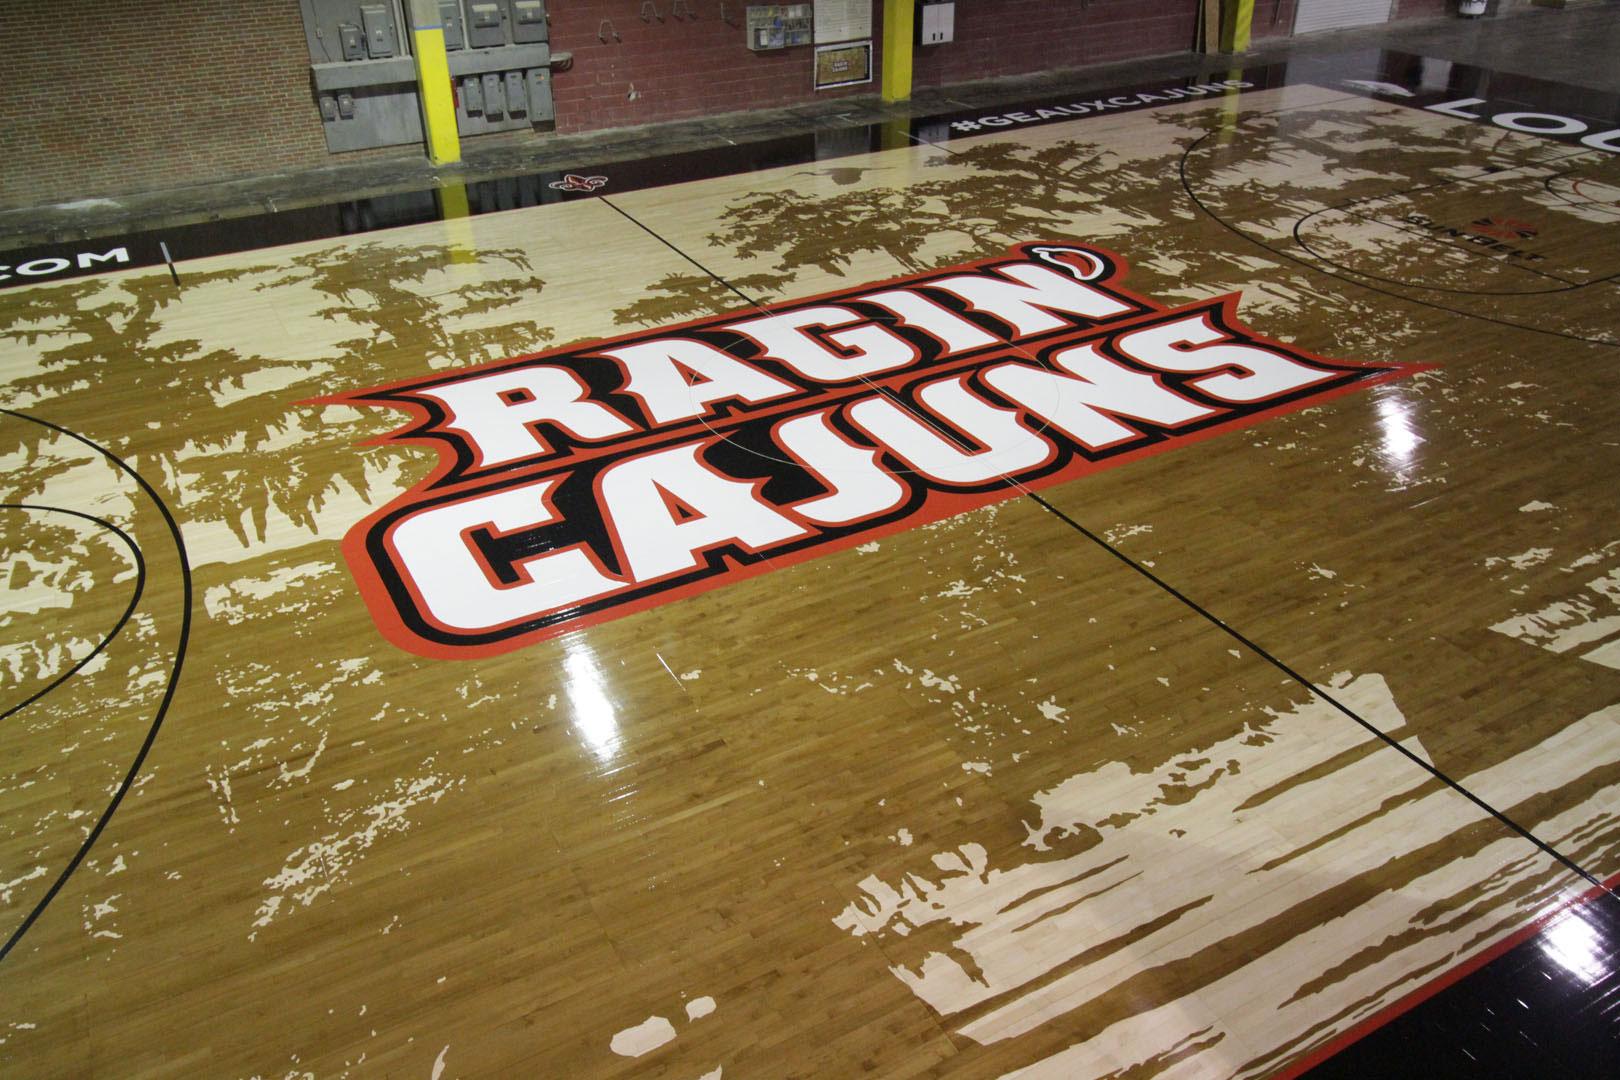 Floor Logo - Praters Gym Floor Design, Stencils and Decals - The Art of the Game